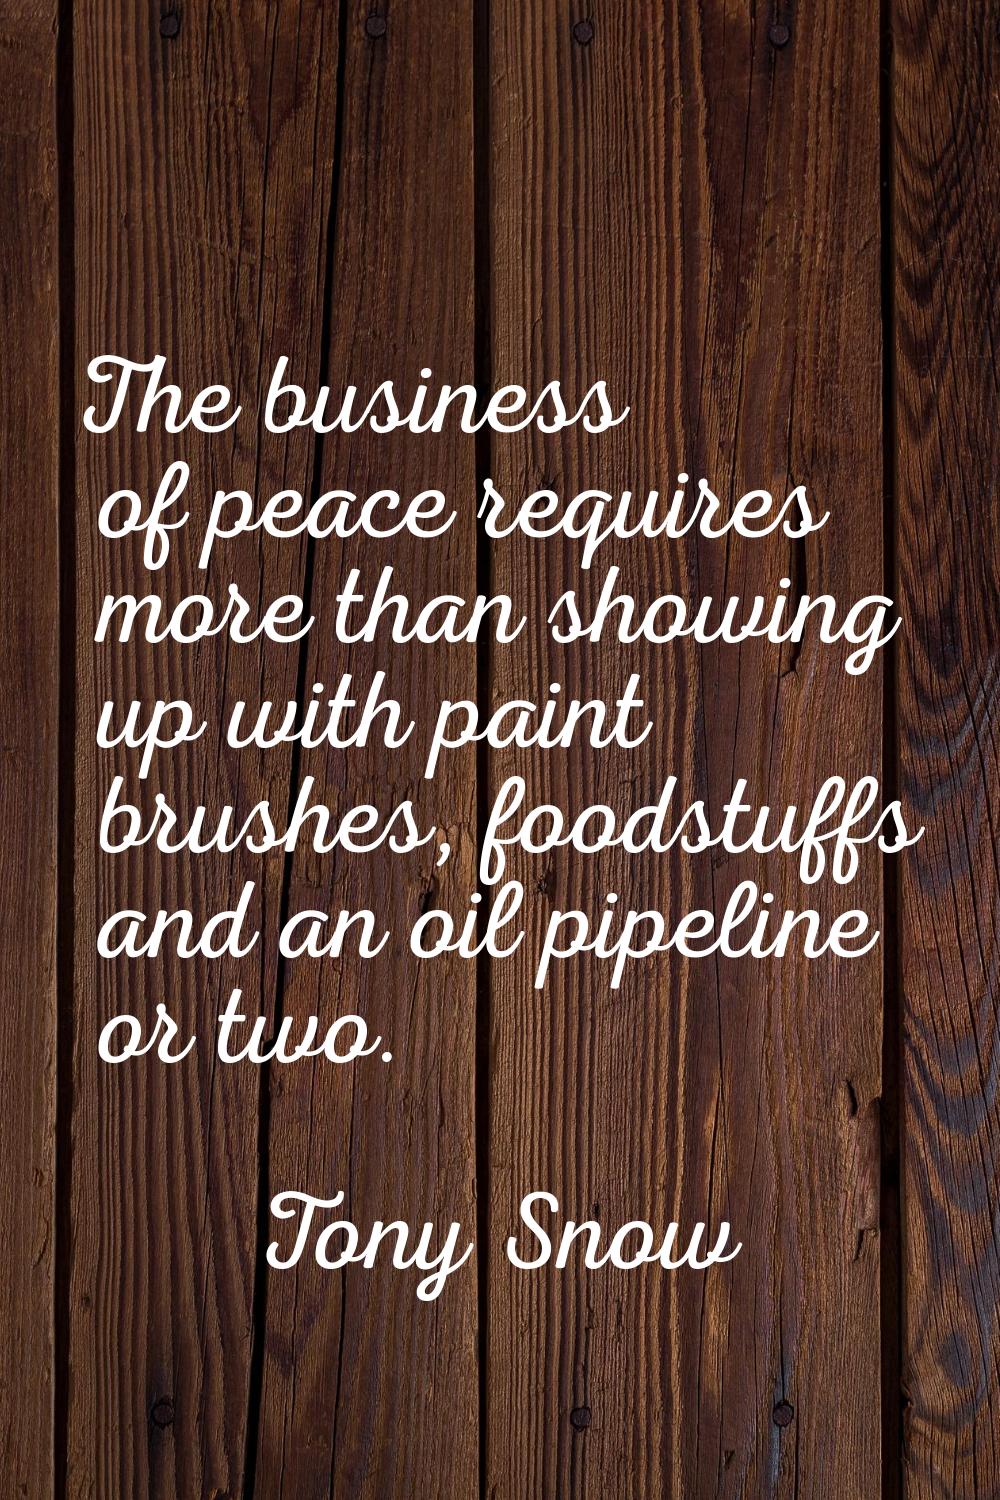 The business of peace requires more than showing up with paint brushes, foodstuffs and an oil pipel